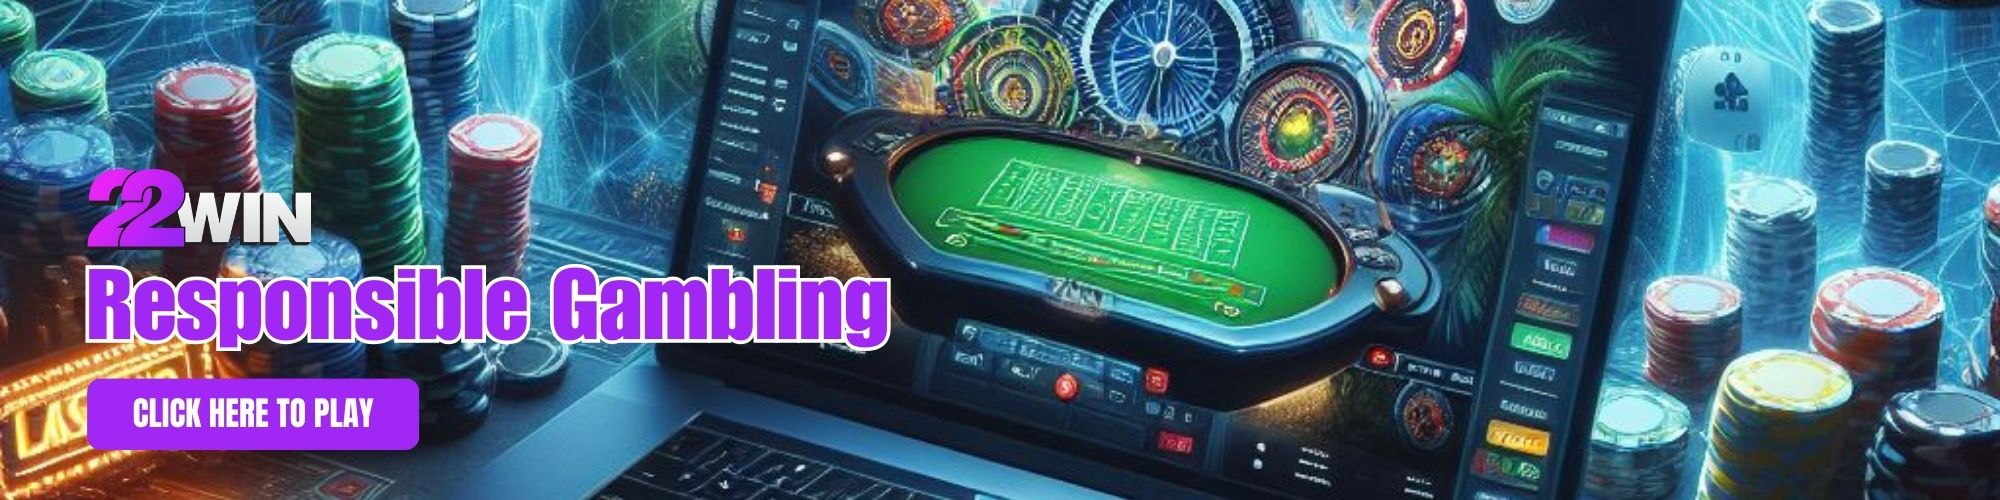 22Win Responsible Gambling in the Philippines